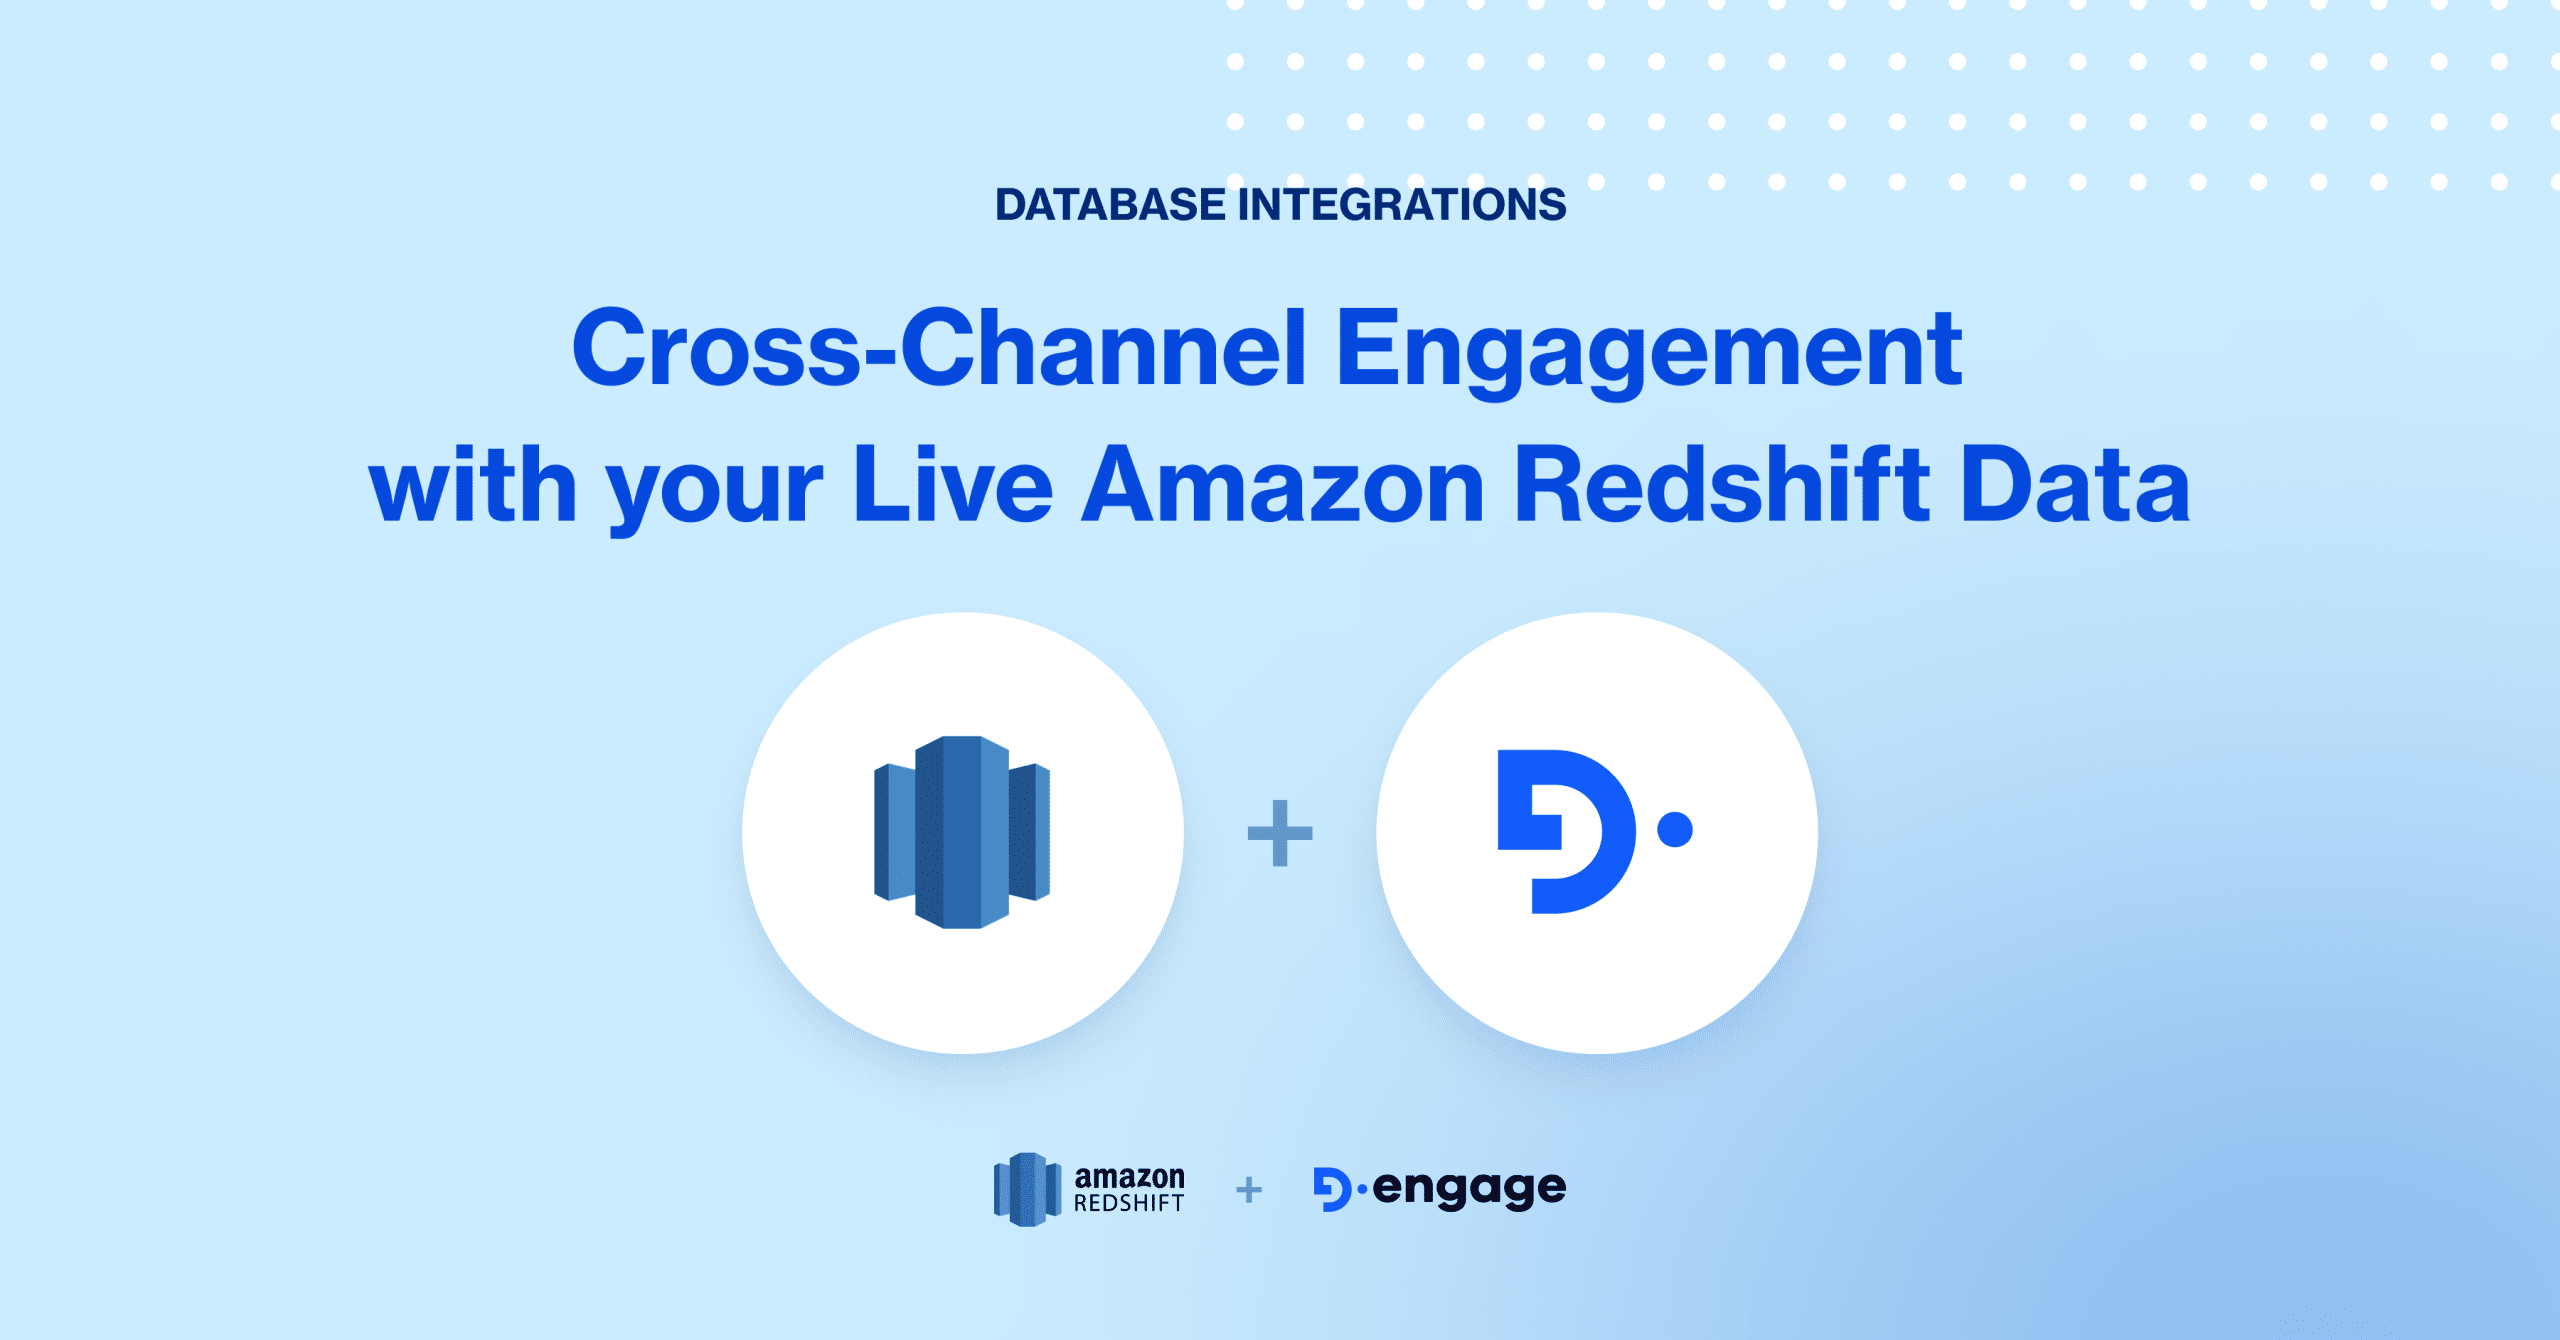 Cross-Channel Engagement with Your Live Amazon Redshift Data